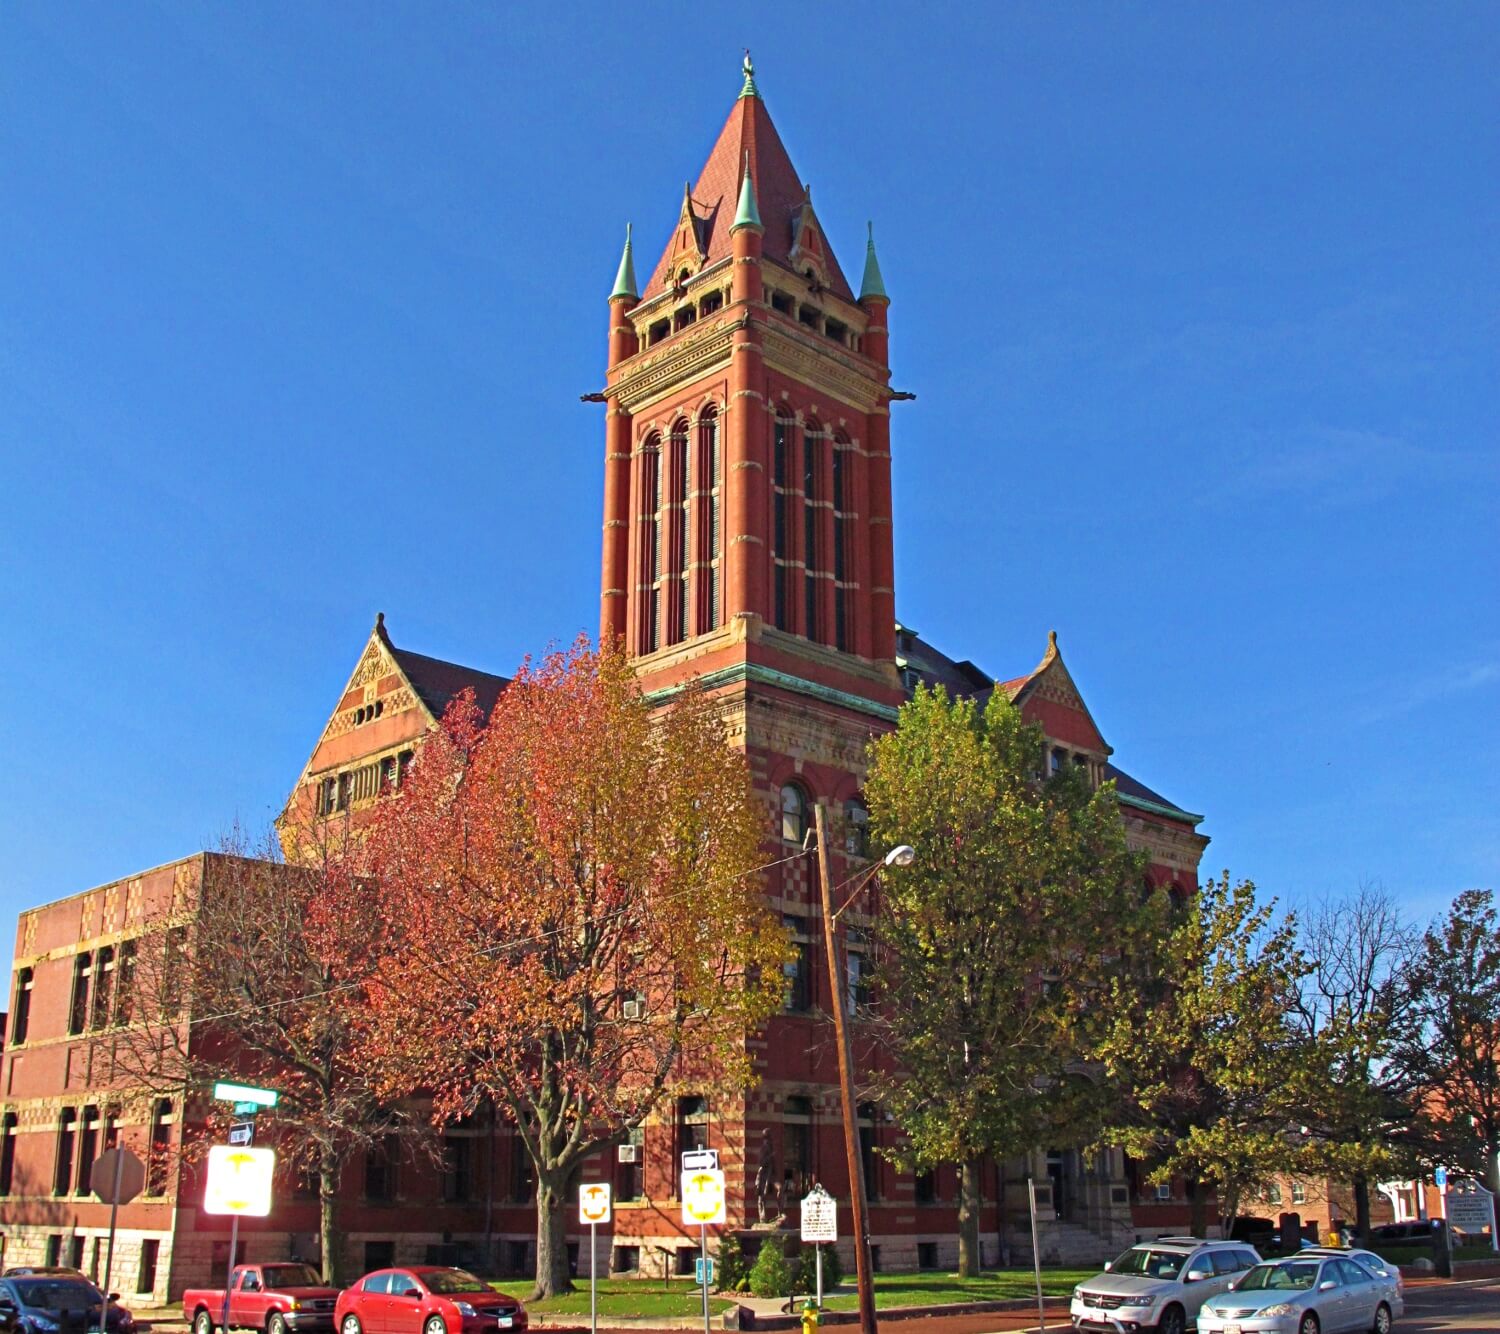 Allegany County Courthouse